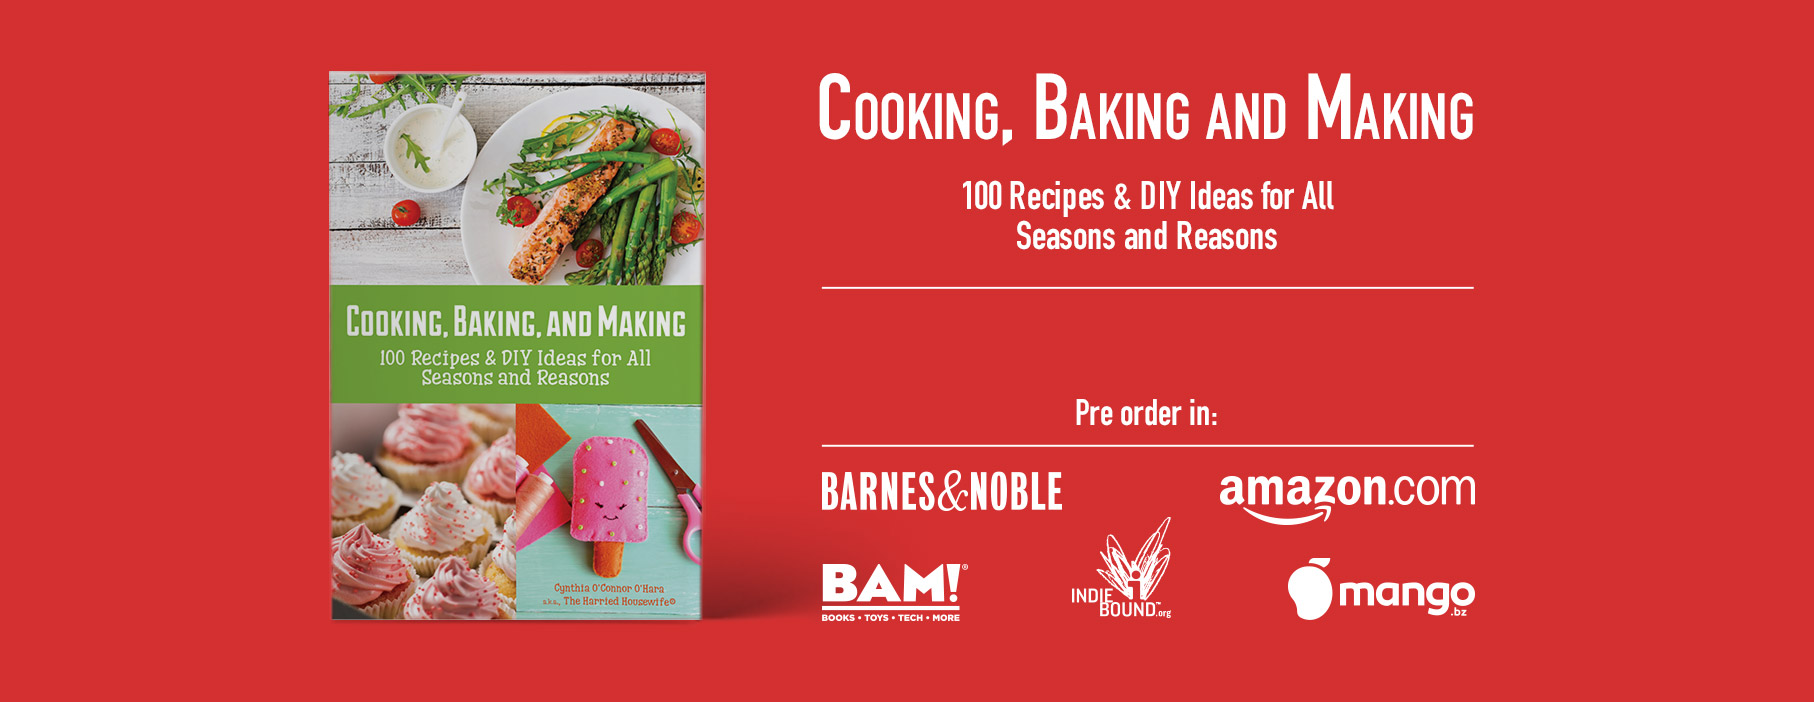 Cooking, Baking, and Making by Cynthia O'Hara, a.k.a., The Harried Housewife